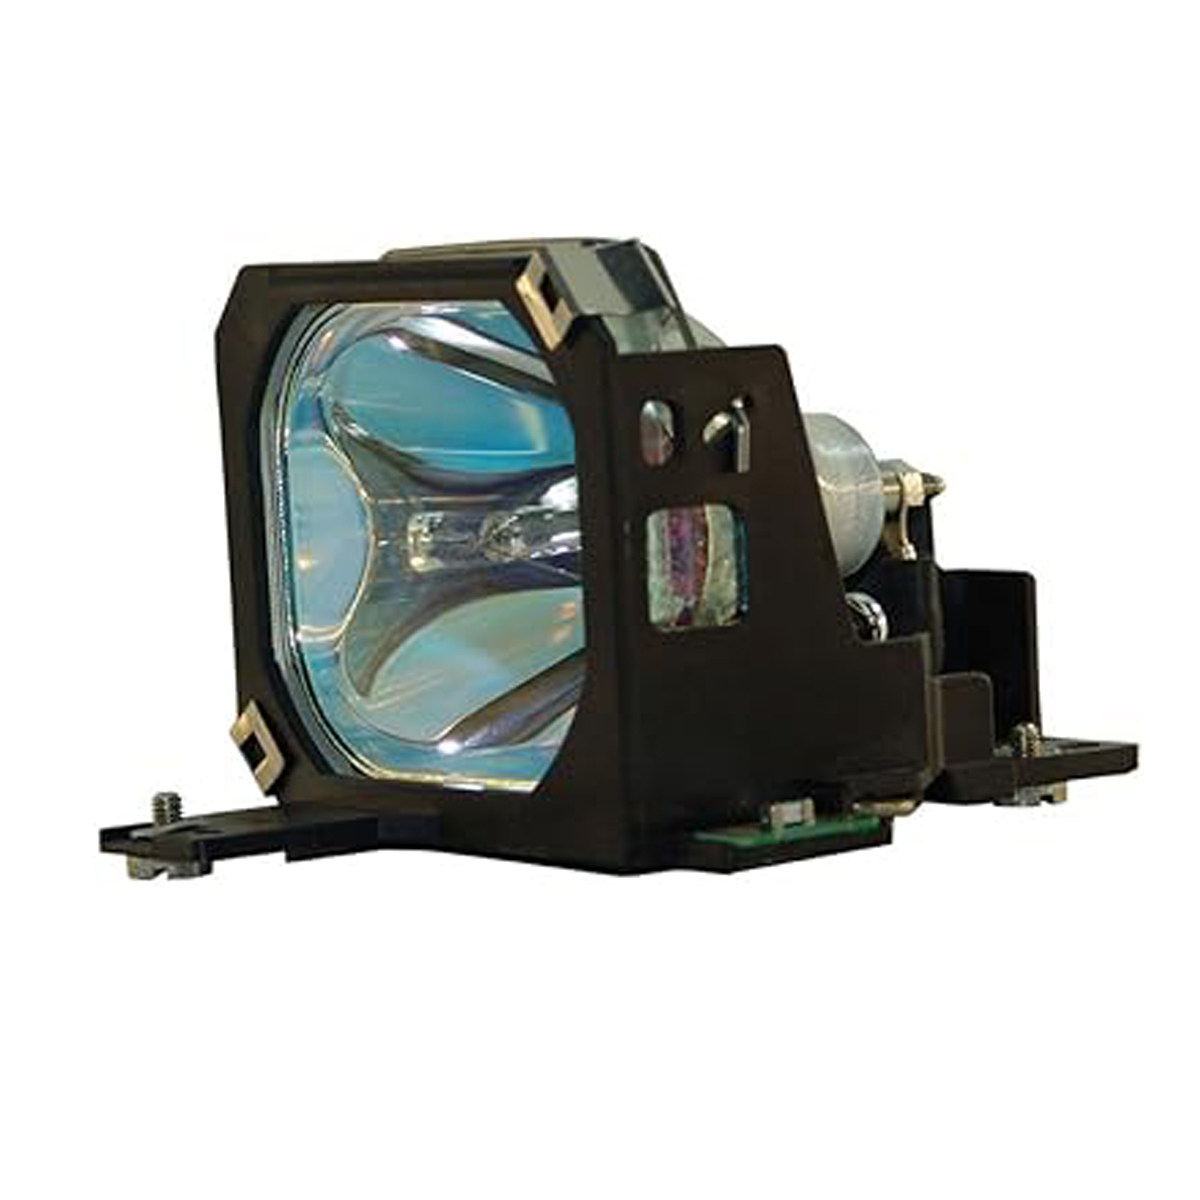 Replacement Projector lamp ELPLP05 For Epson EMP-5300 EMP-7200 EMP-7300